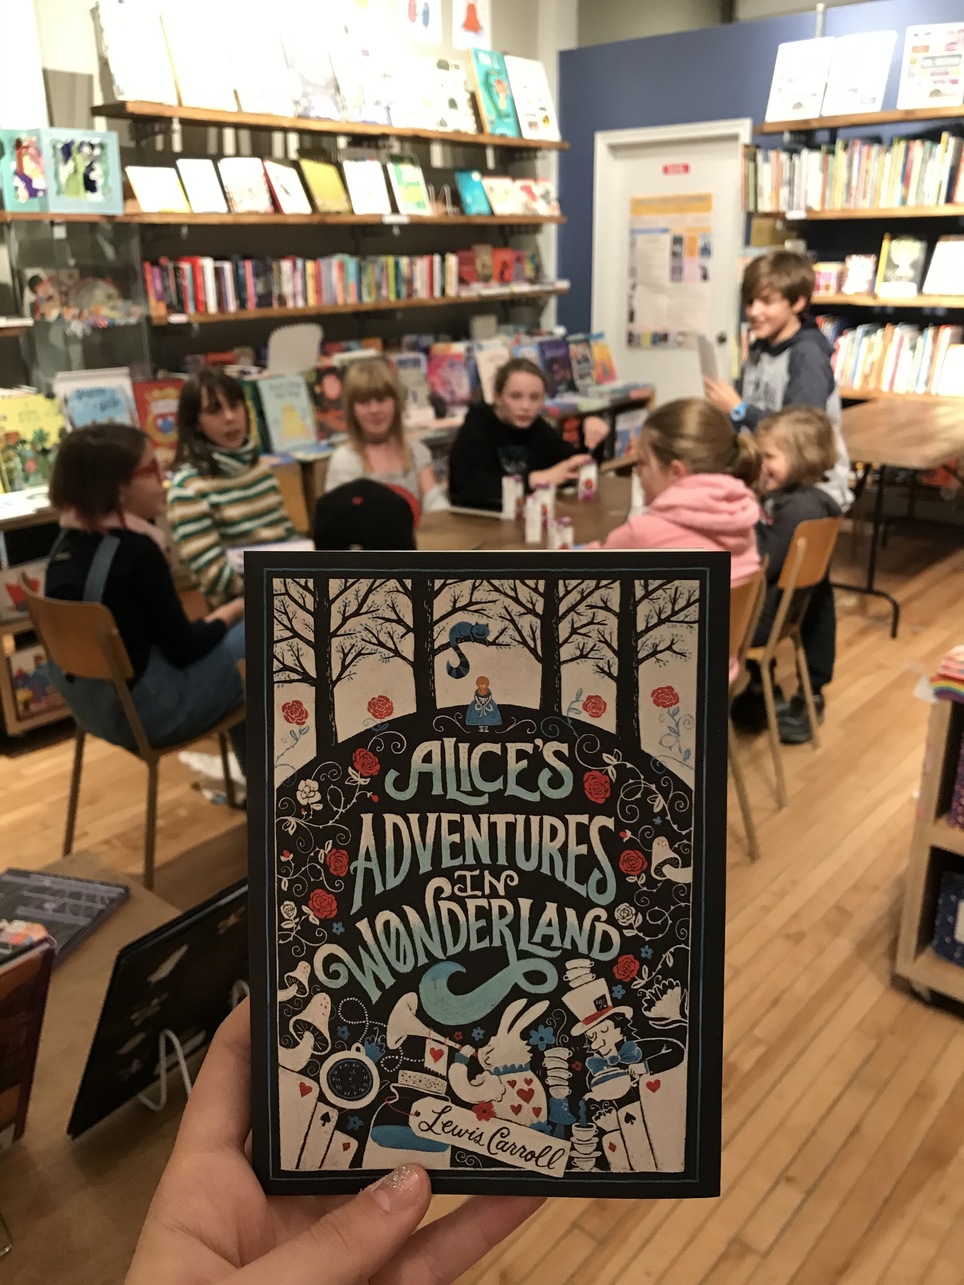 OFF WITH THEIR HEADS! (Young Readers discuss Alice in Wonderland)